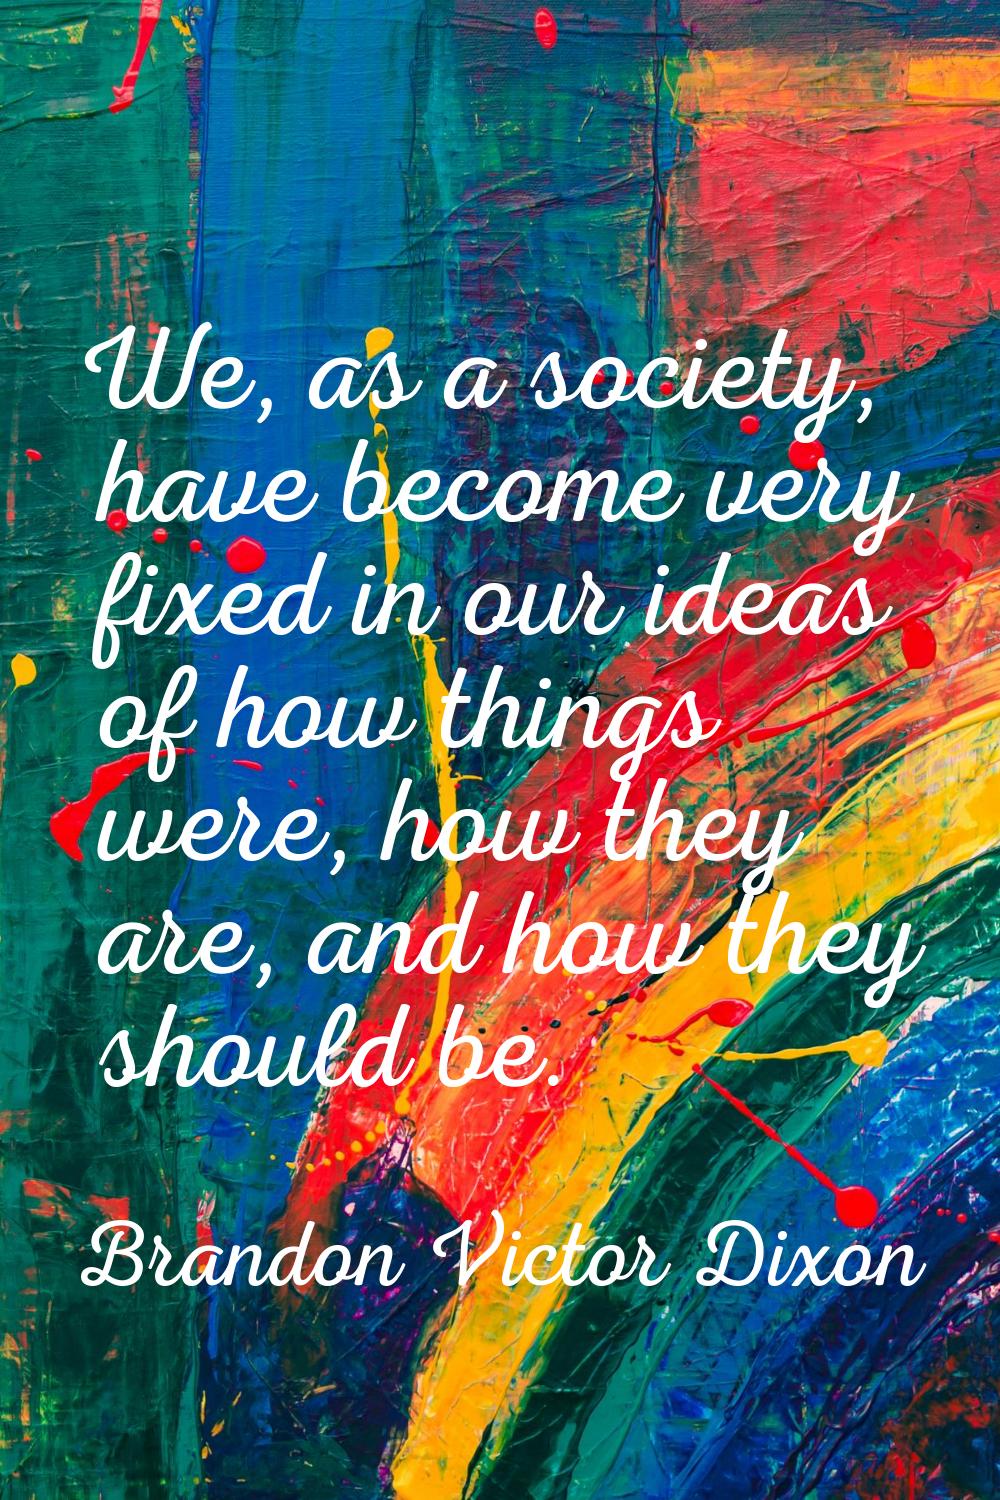 We, as a society, have become very fixed in our ideas of how things were, how they are, and how the